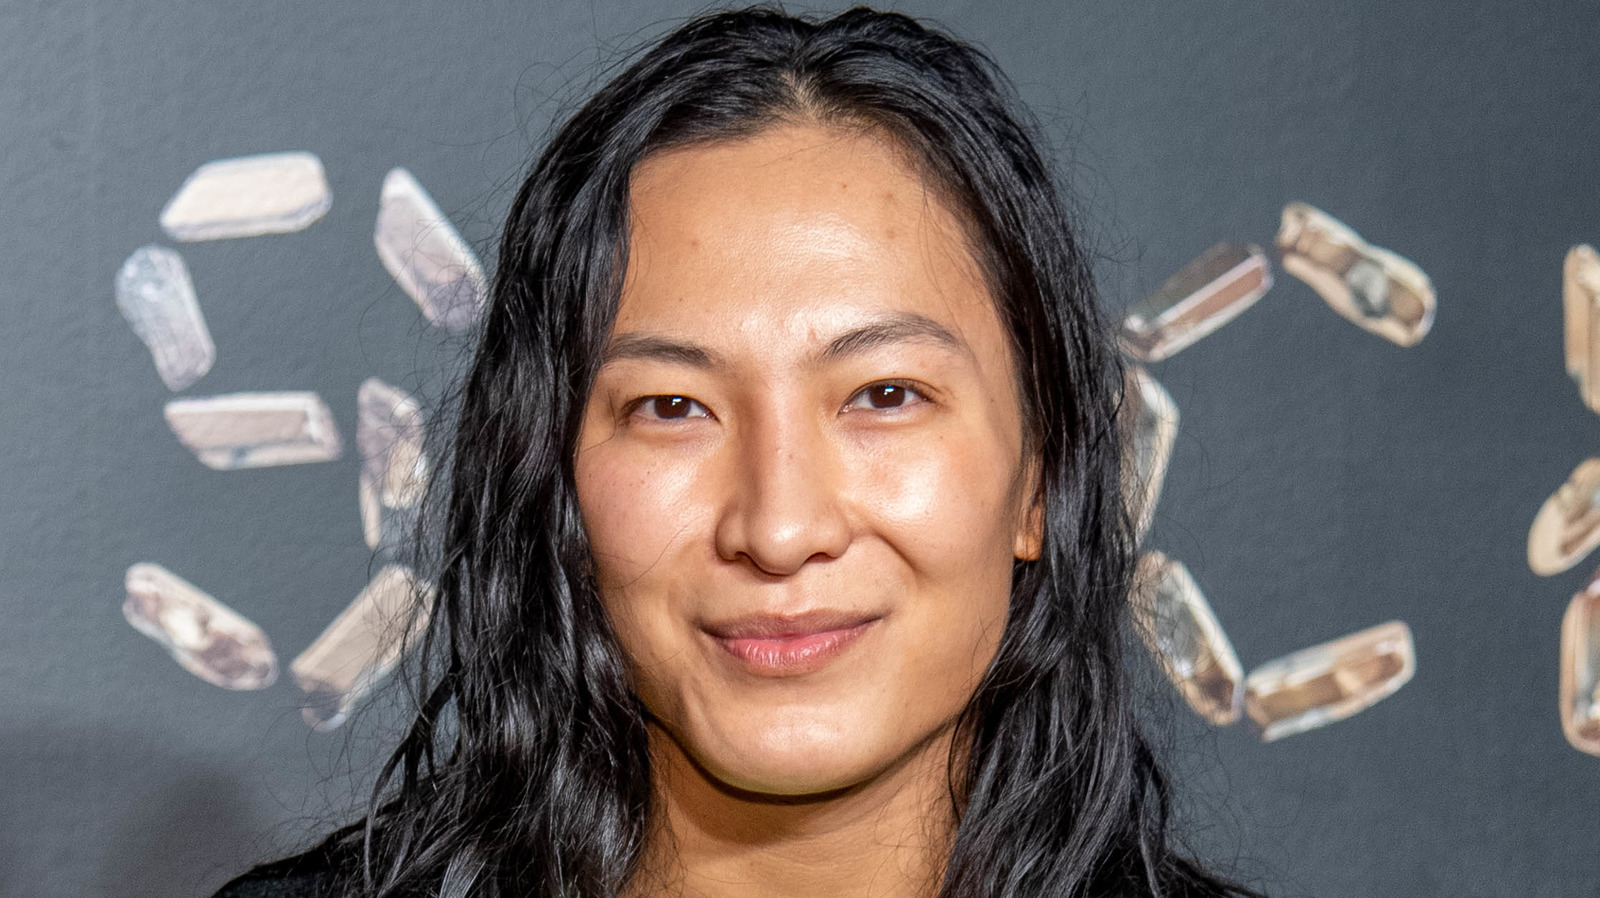 Alexander Wang's Net Worth Is Higher Than You Think